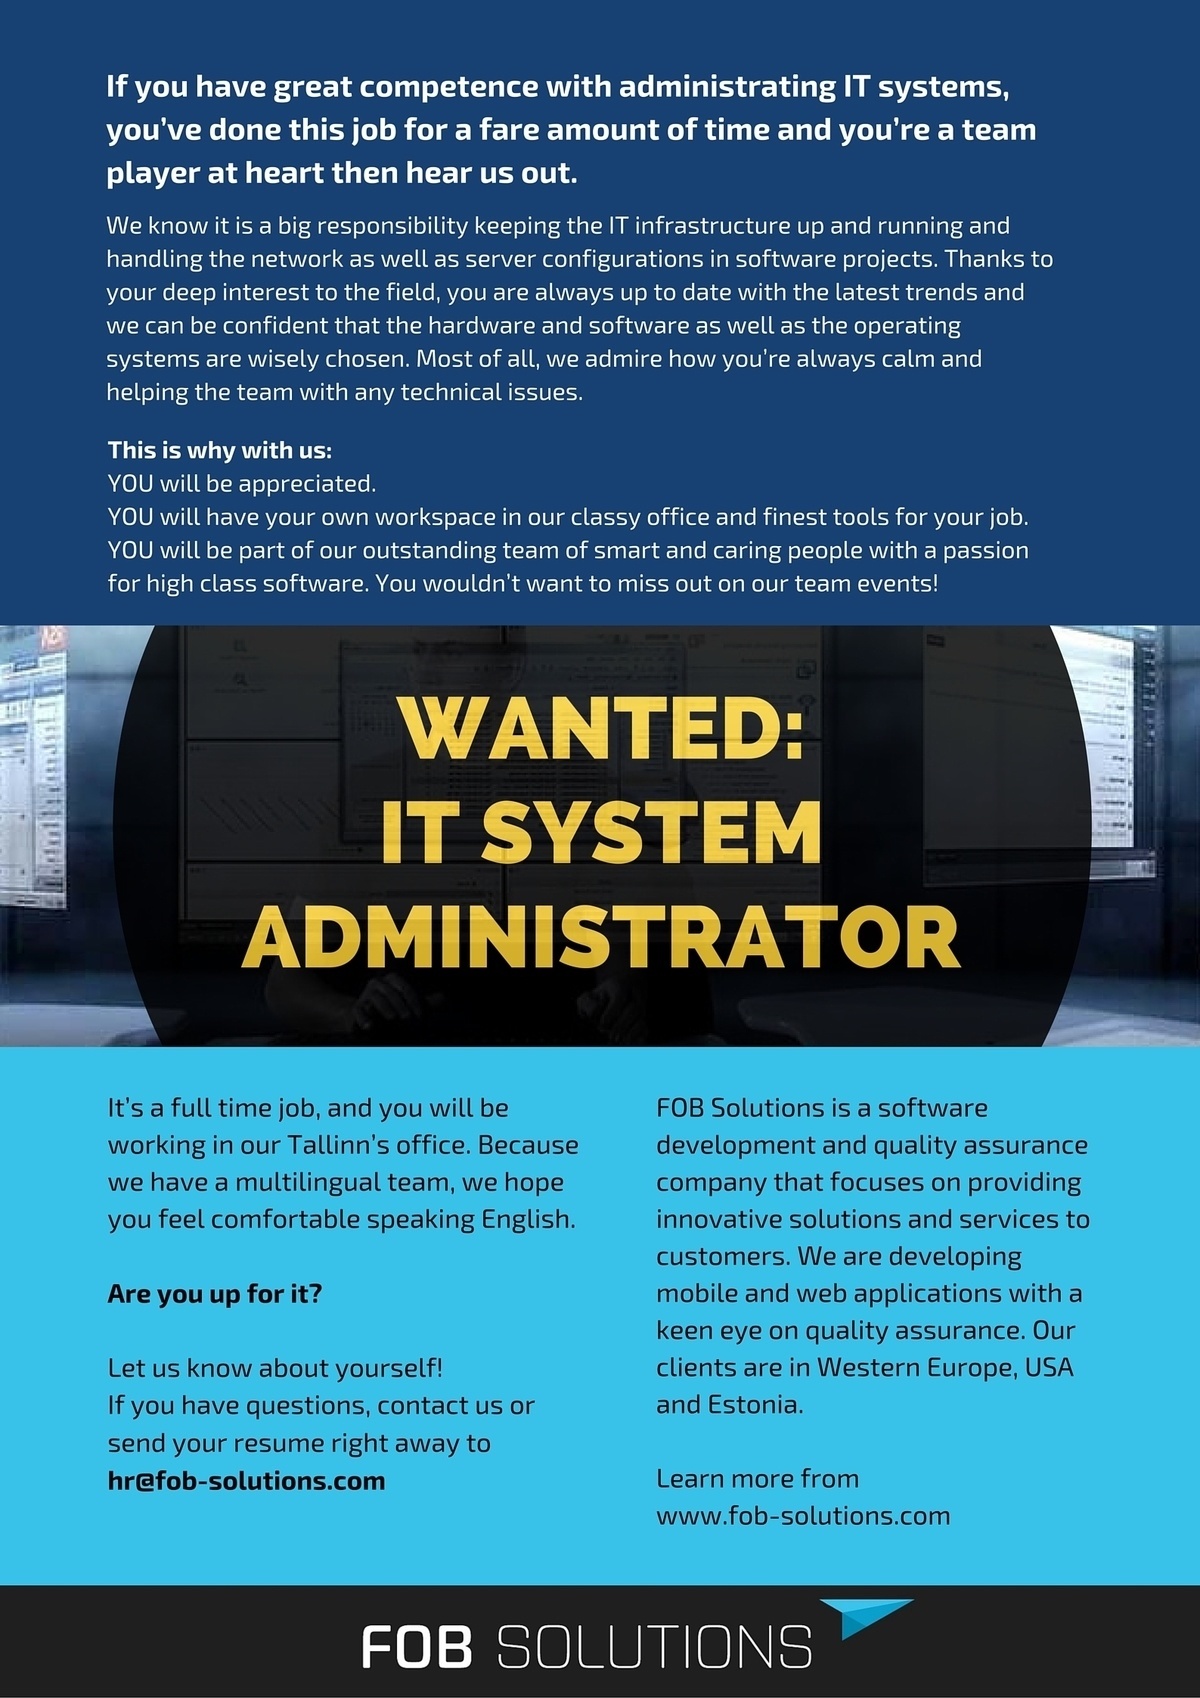 FOB Solutions OÜ IT System Administrator